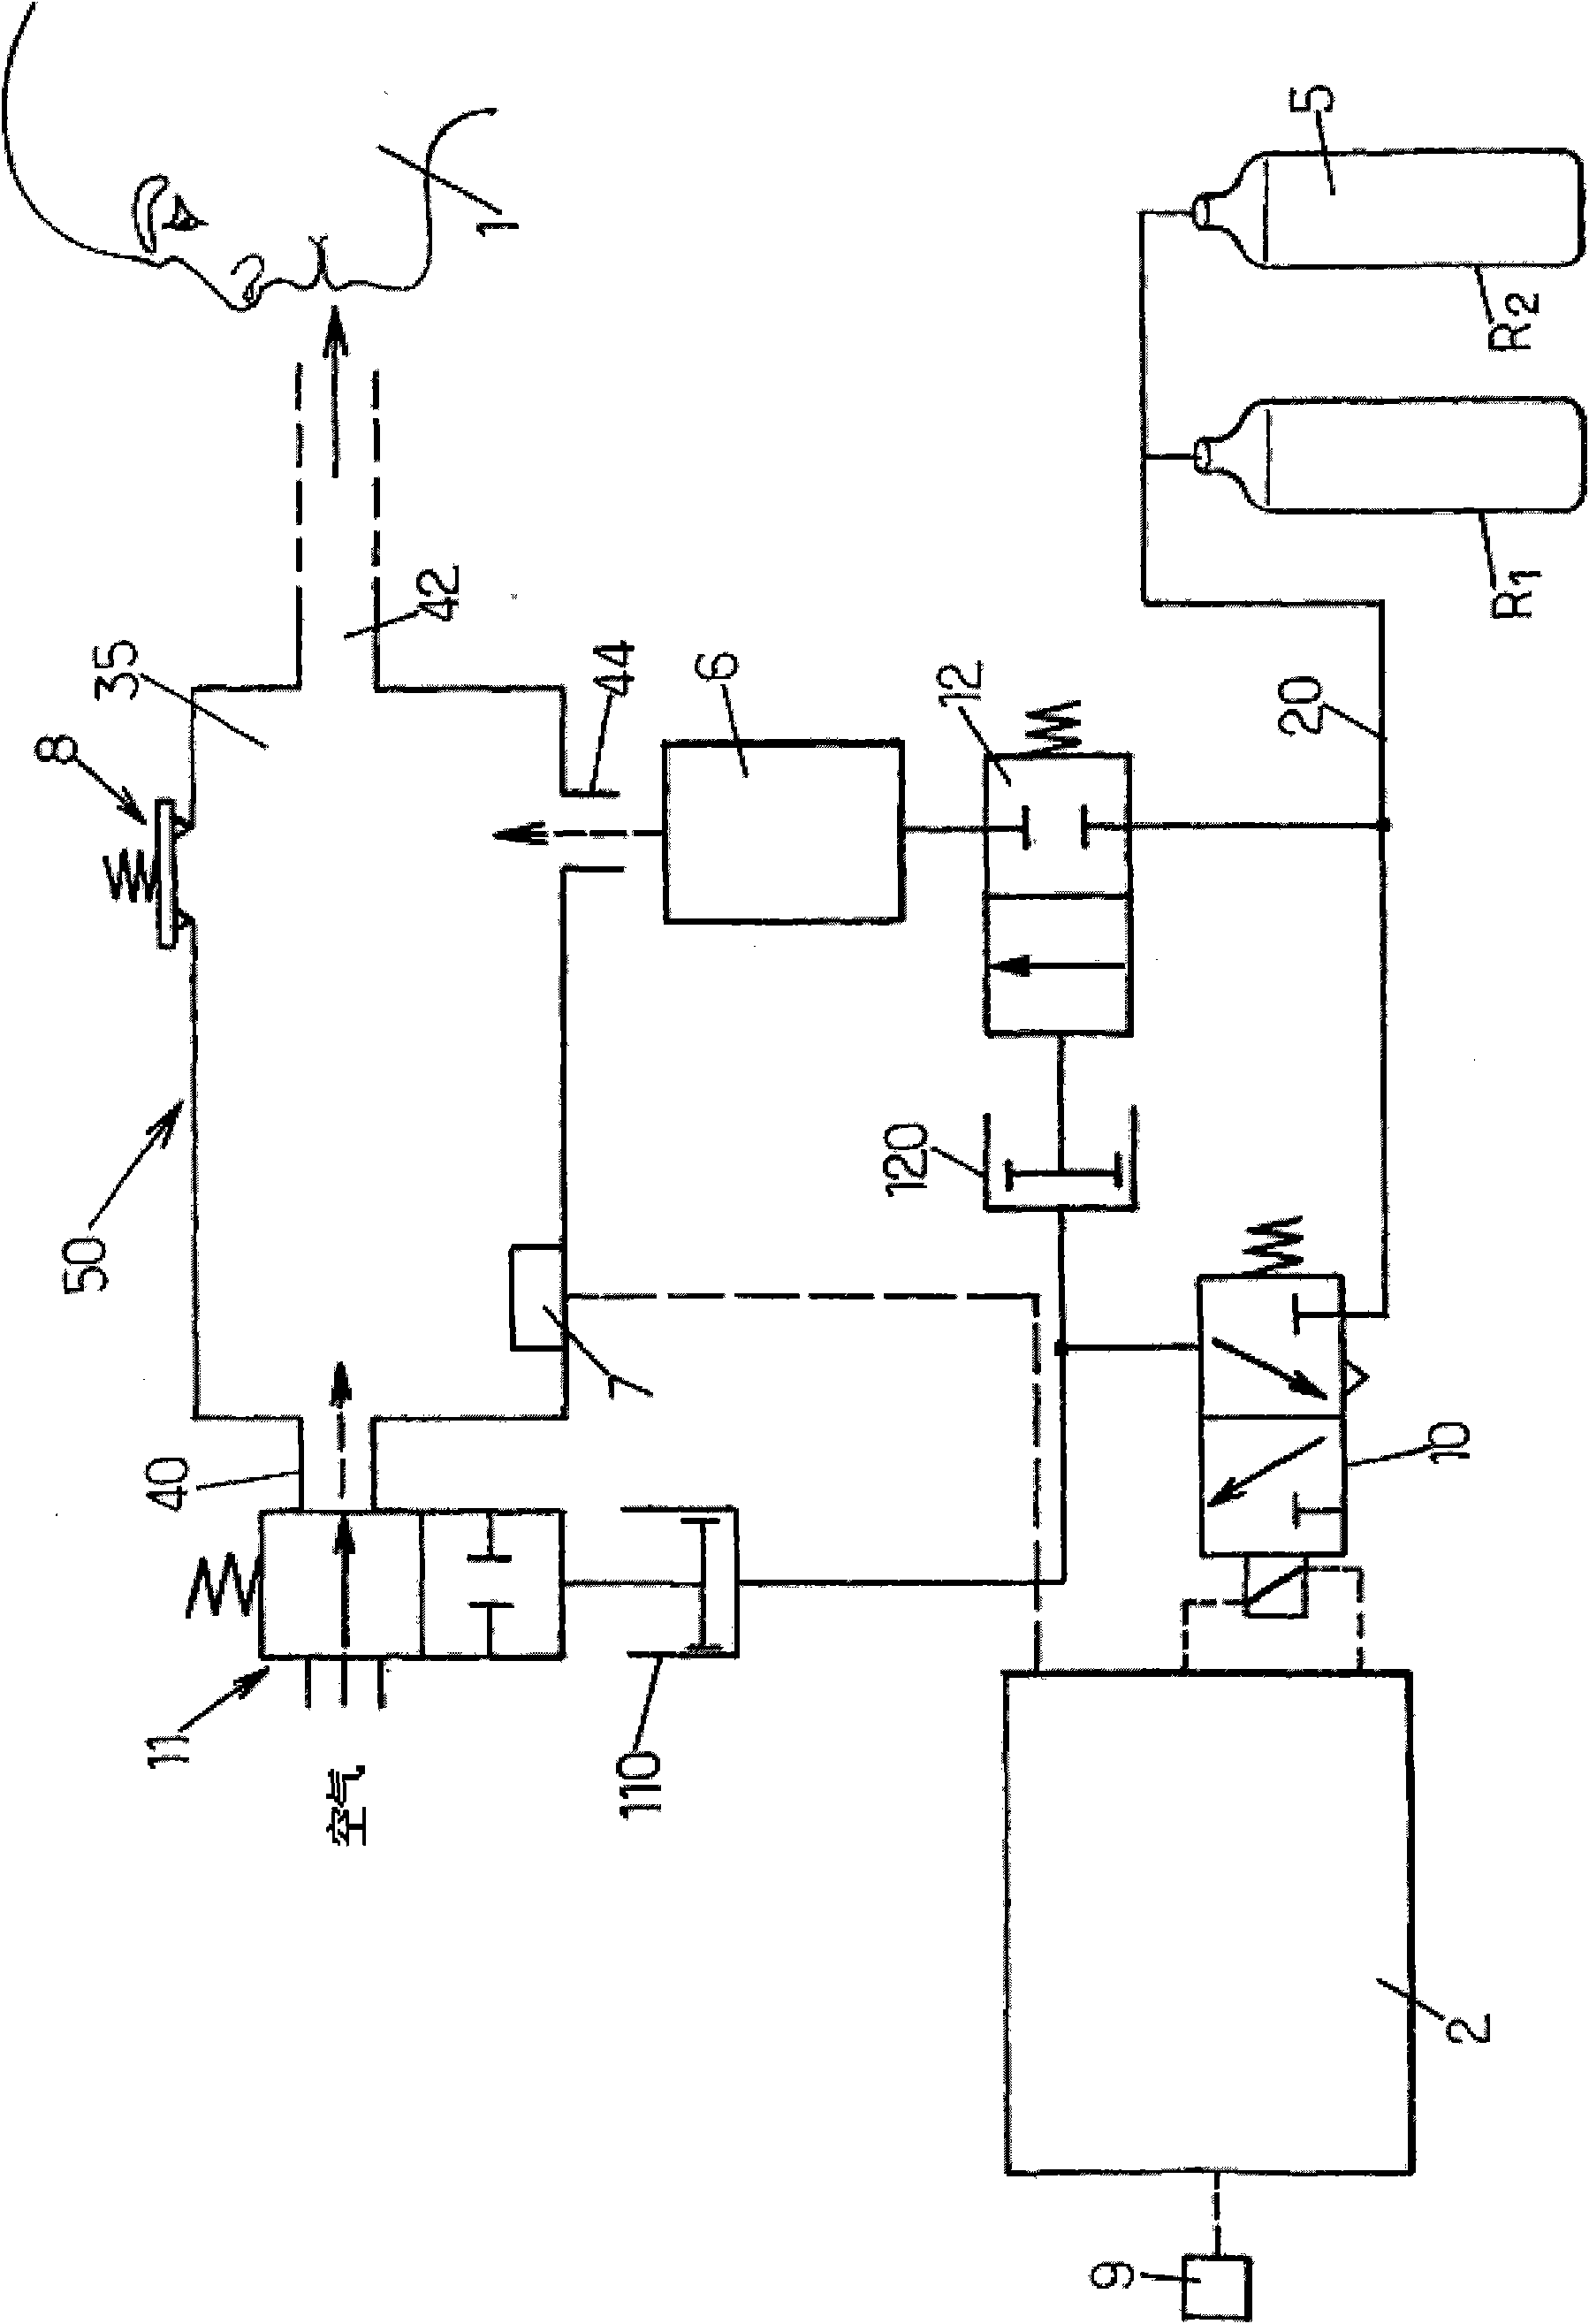 A respiratory gas supply circuit to feed crew members and passengers of an aircraft with oxygen